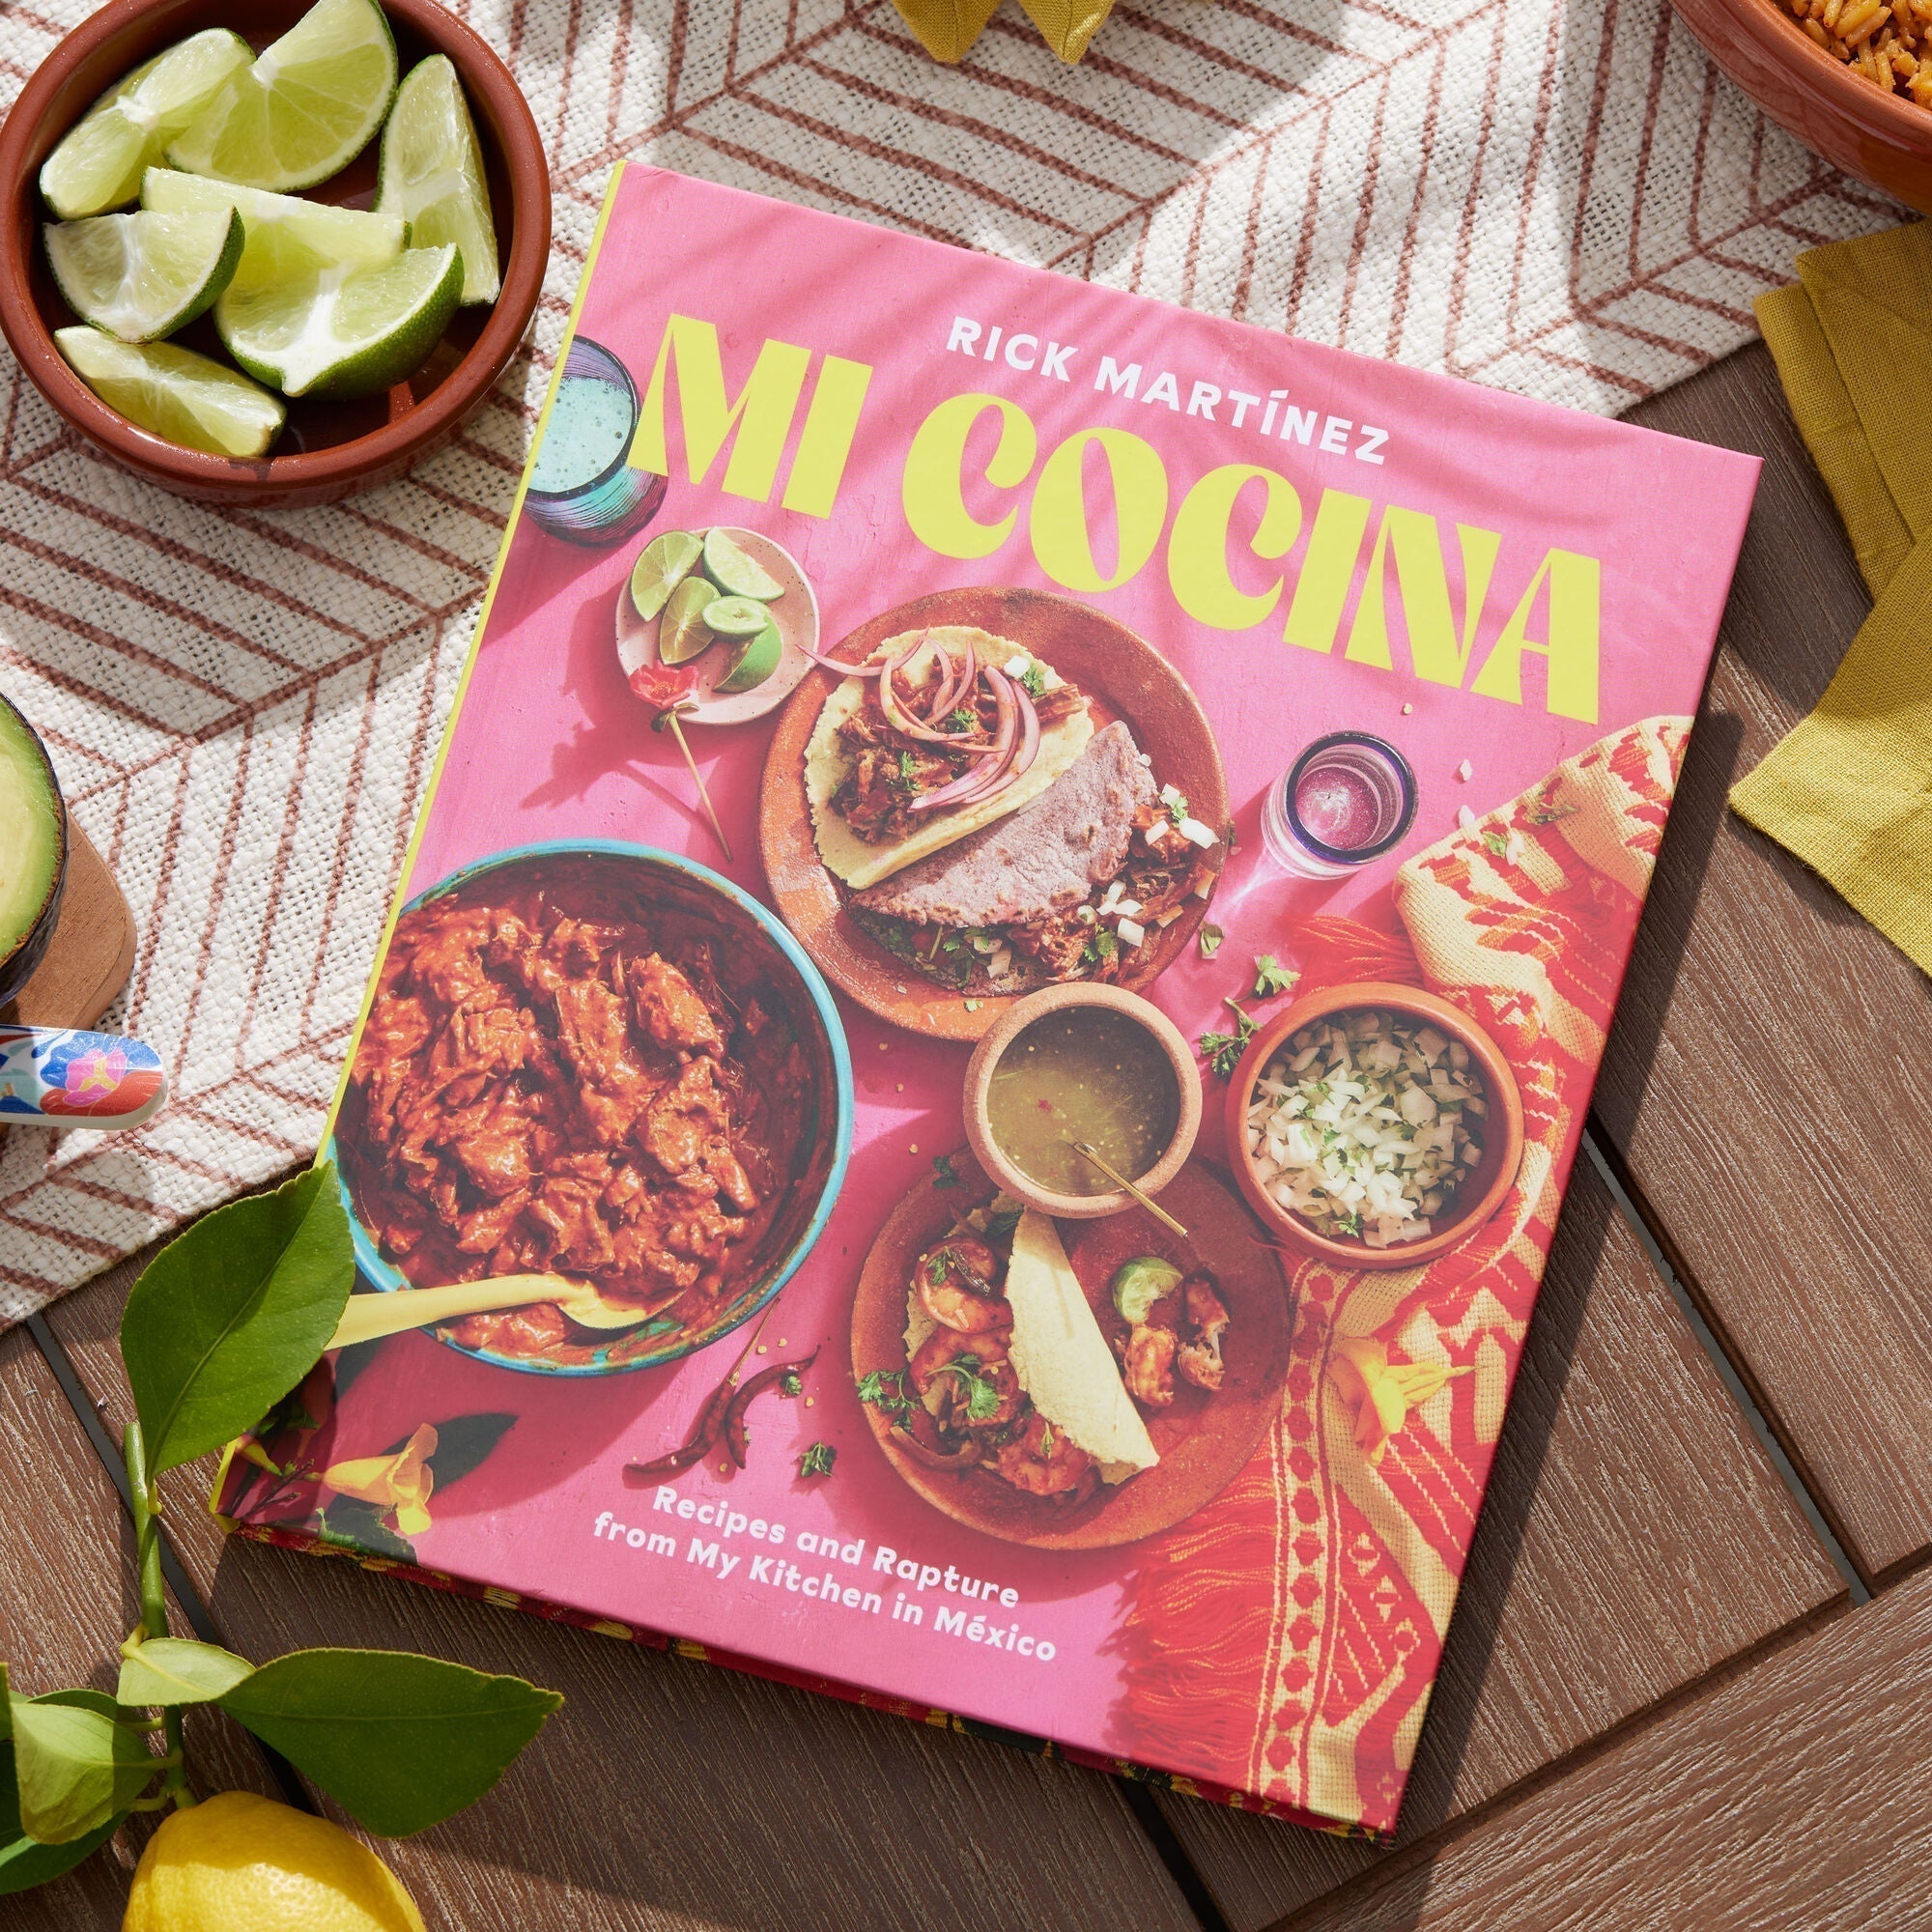 45 Year Mexican Cookbook Set